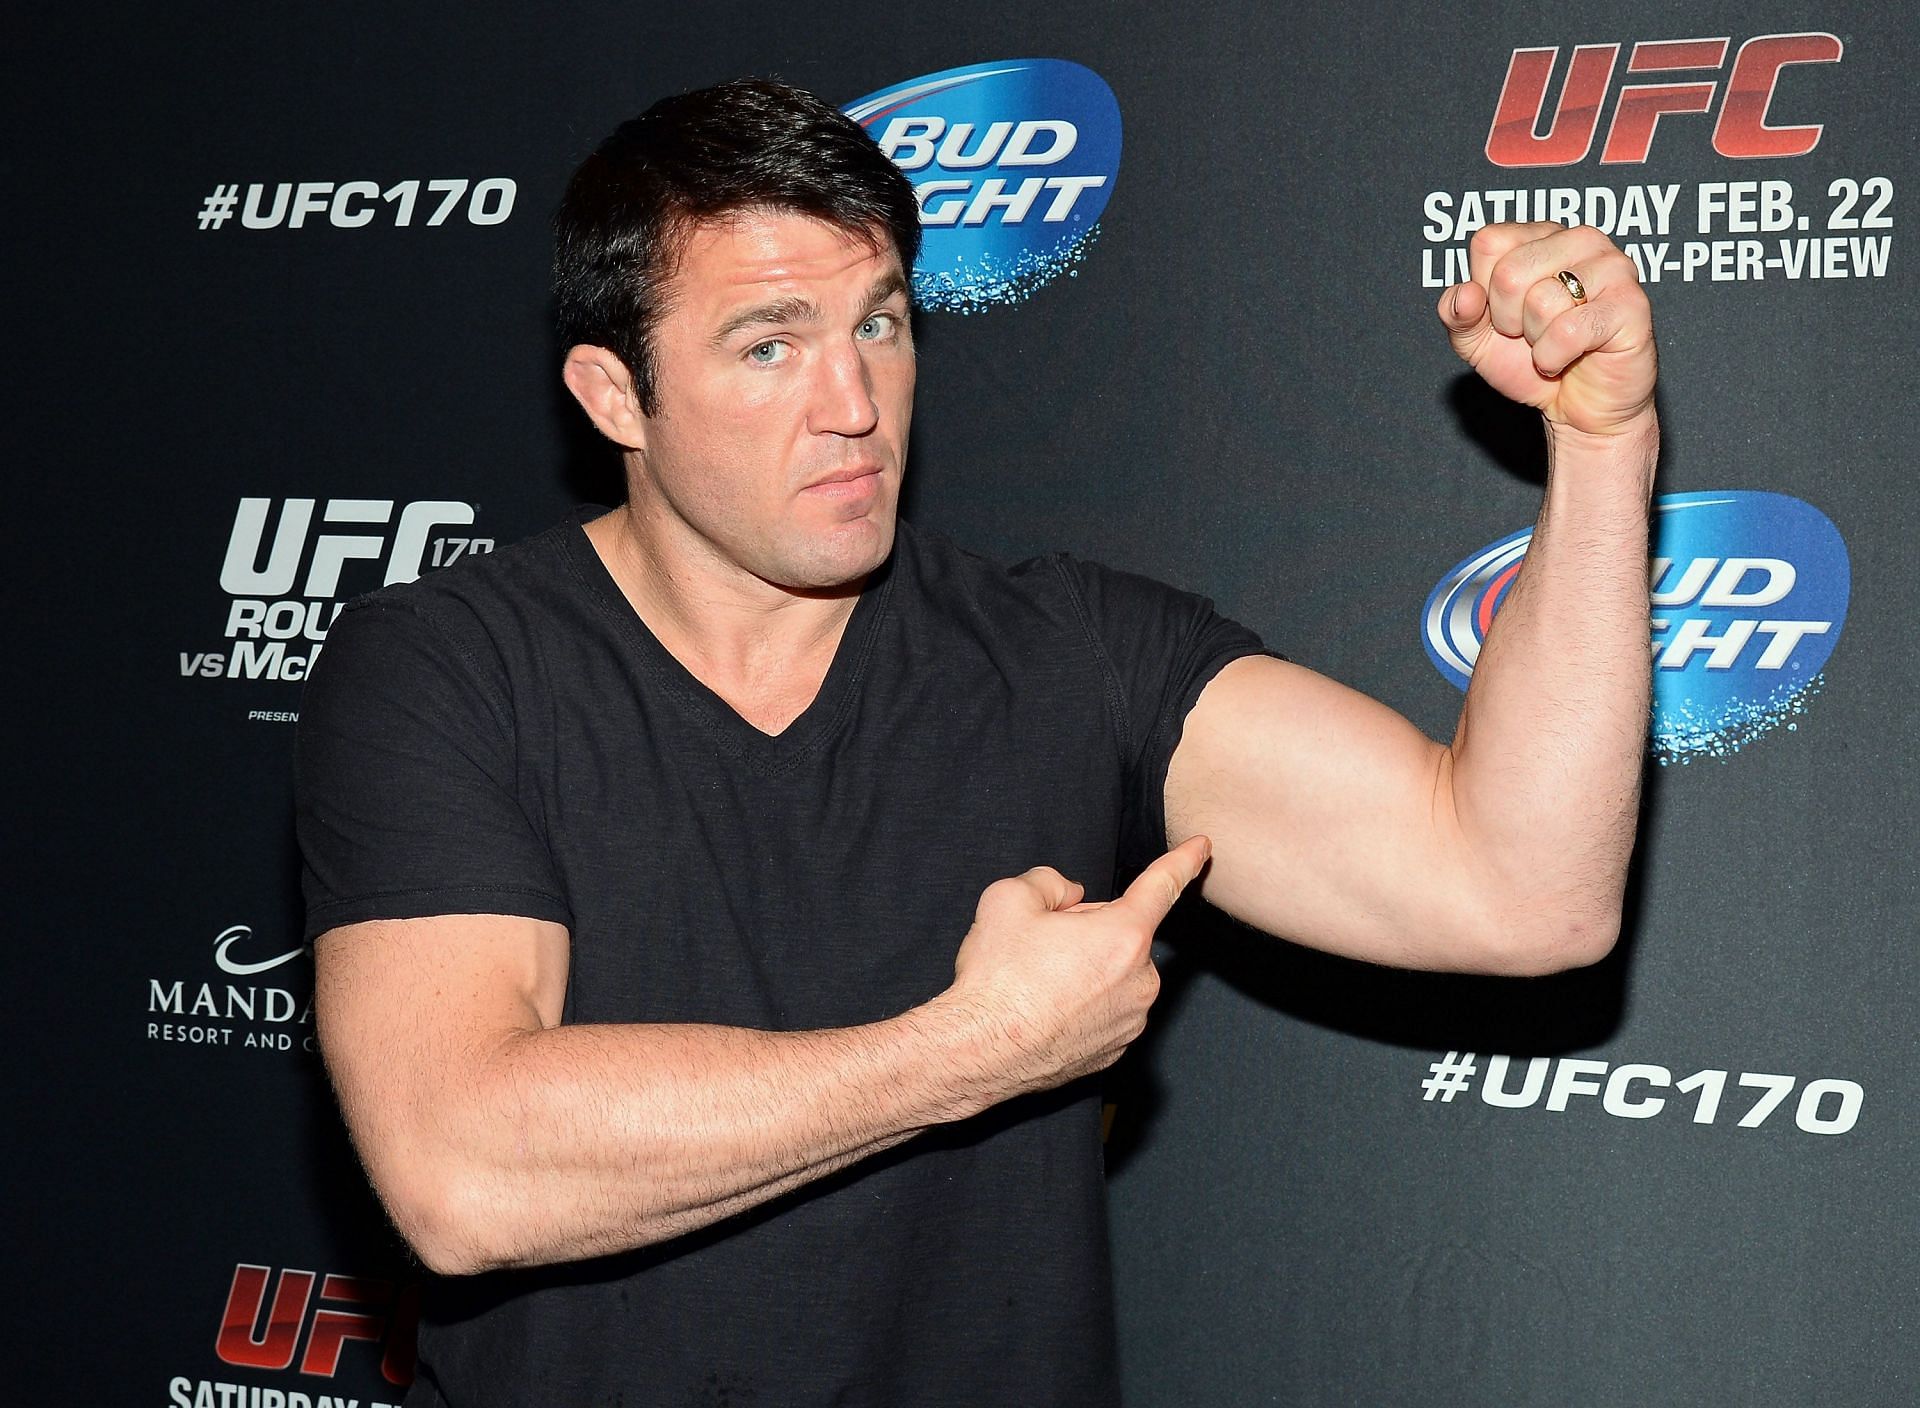 Chael Sonnen fared far worse the second time around against his great rival Anderson Silva